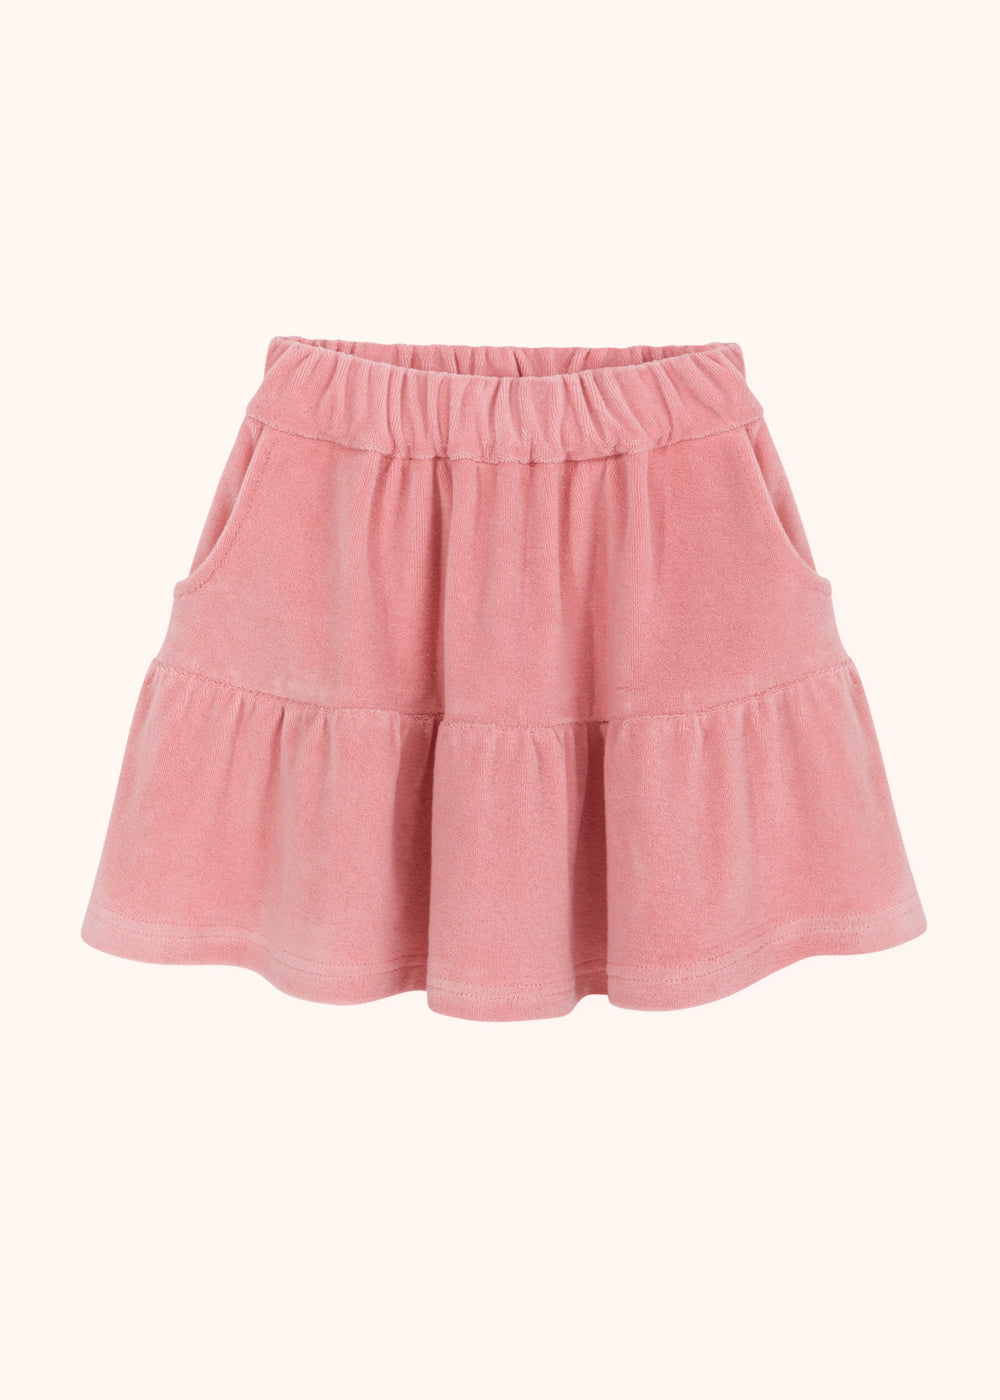 French Terry Pink Frill Skirt